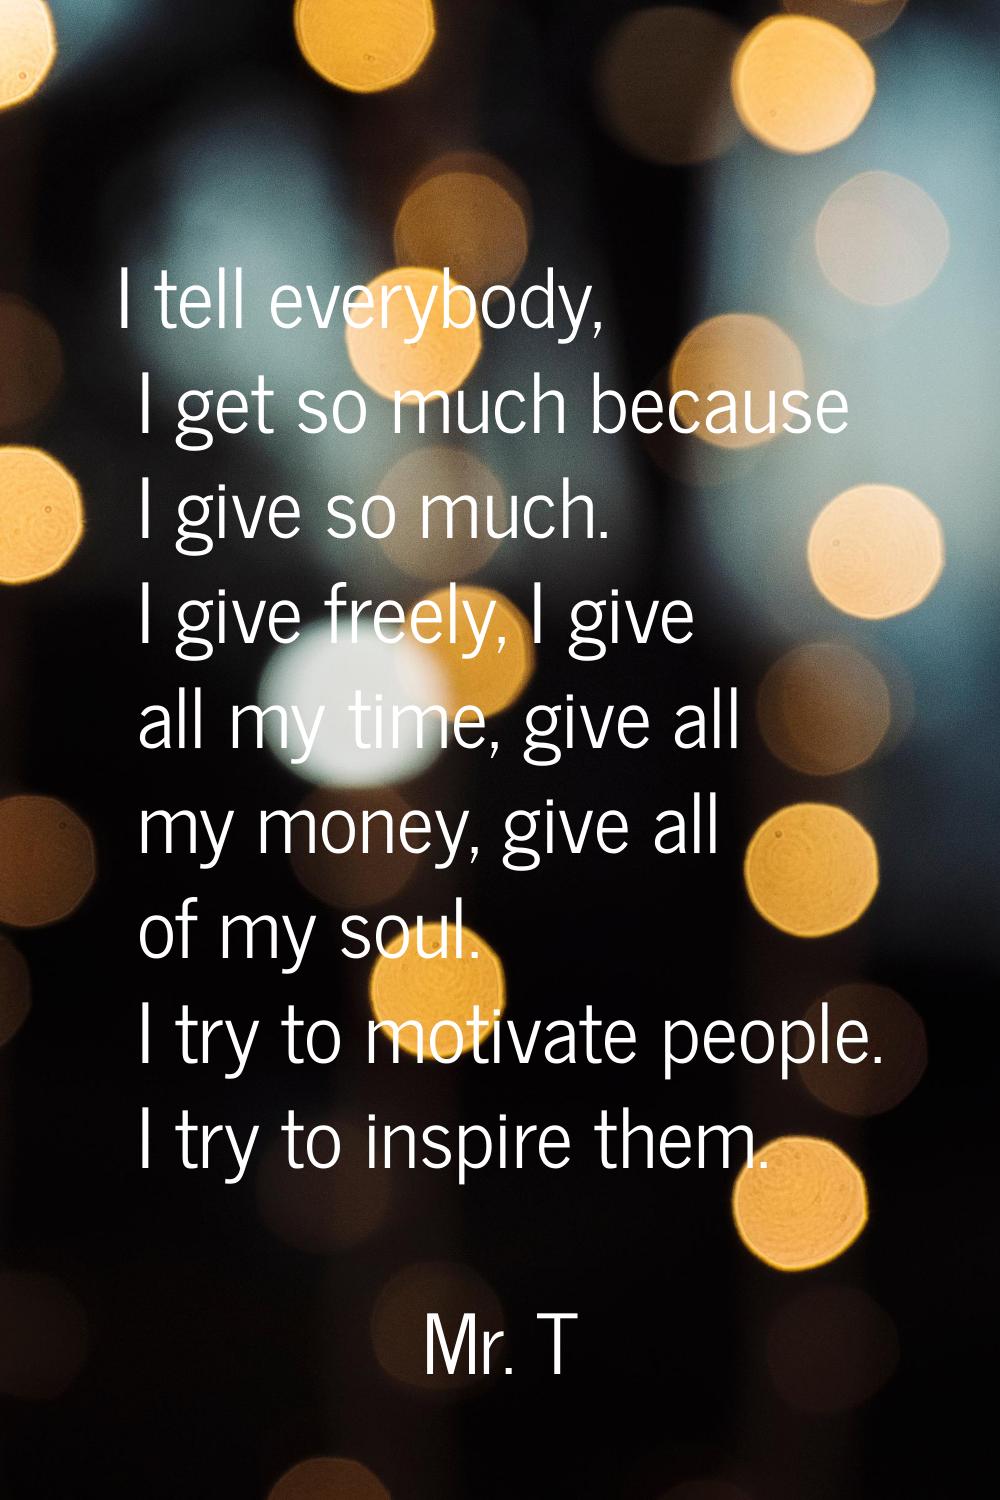 I tell everybody, I get so much because I give so much. I give freely, I give all my time, give all